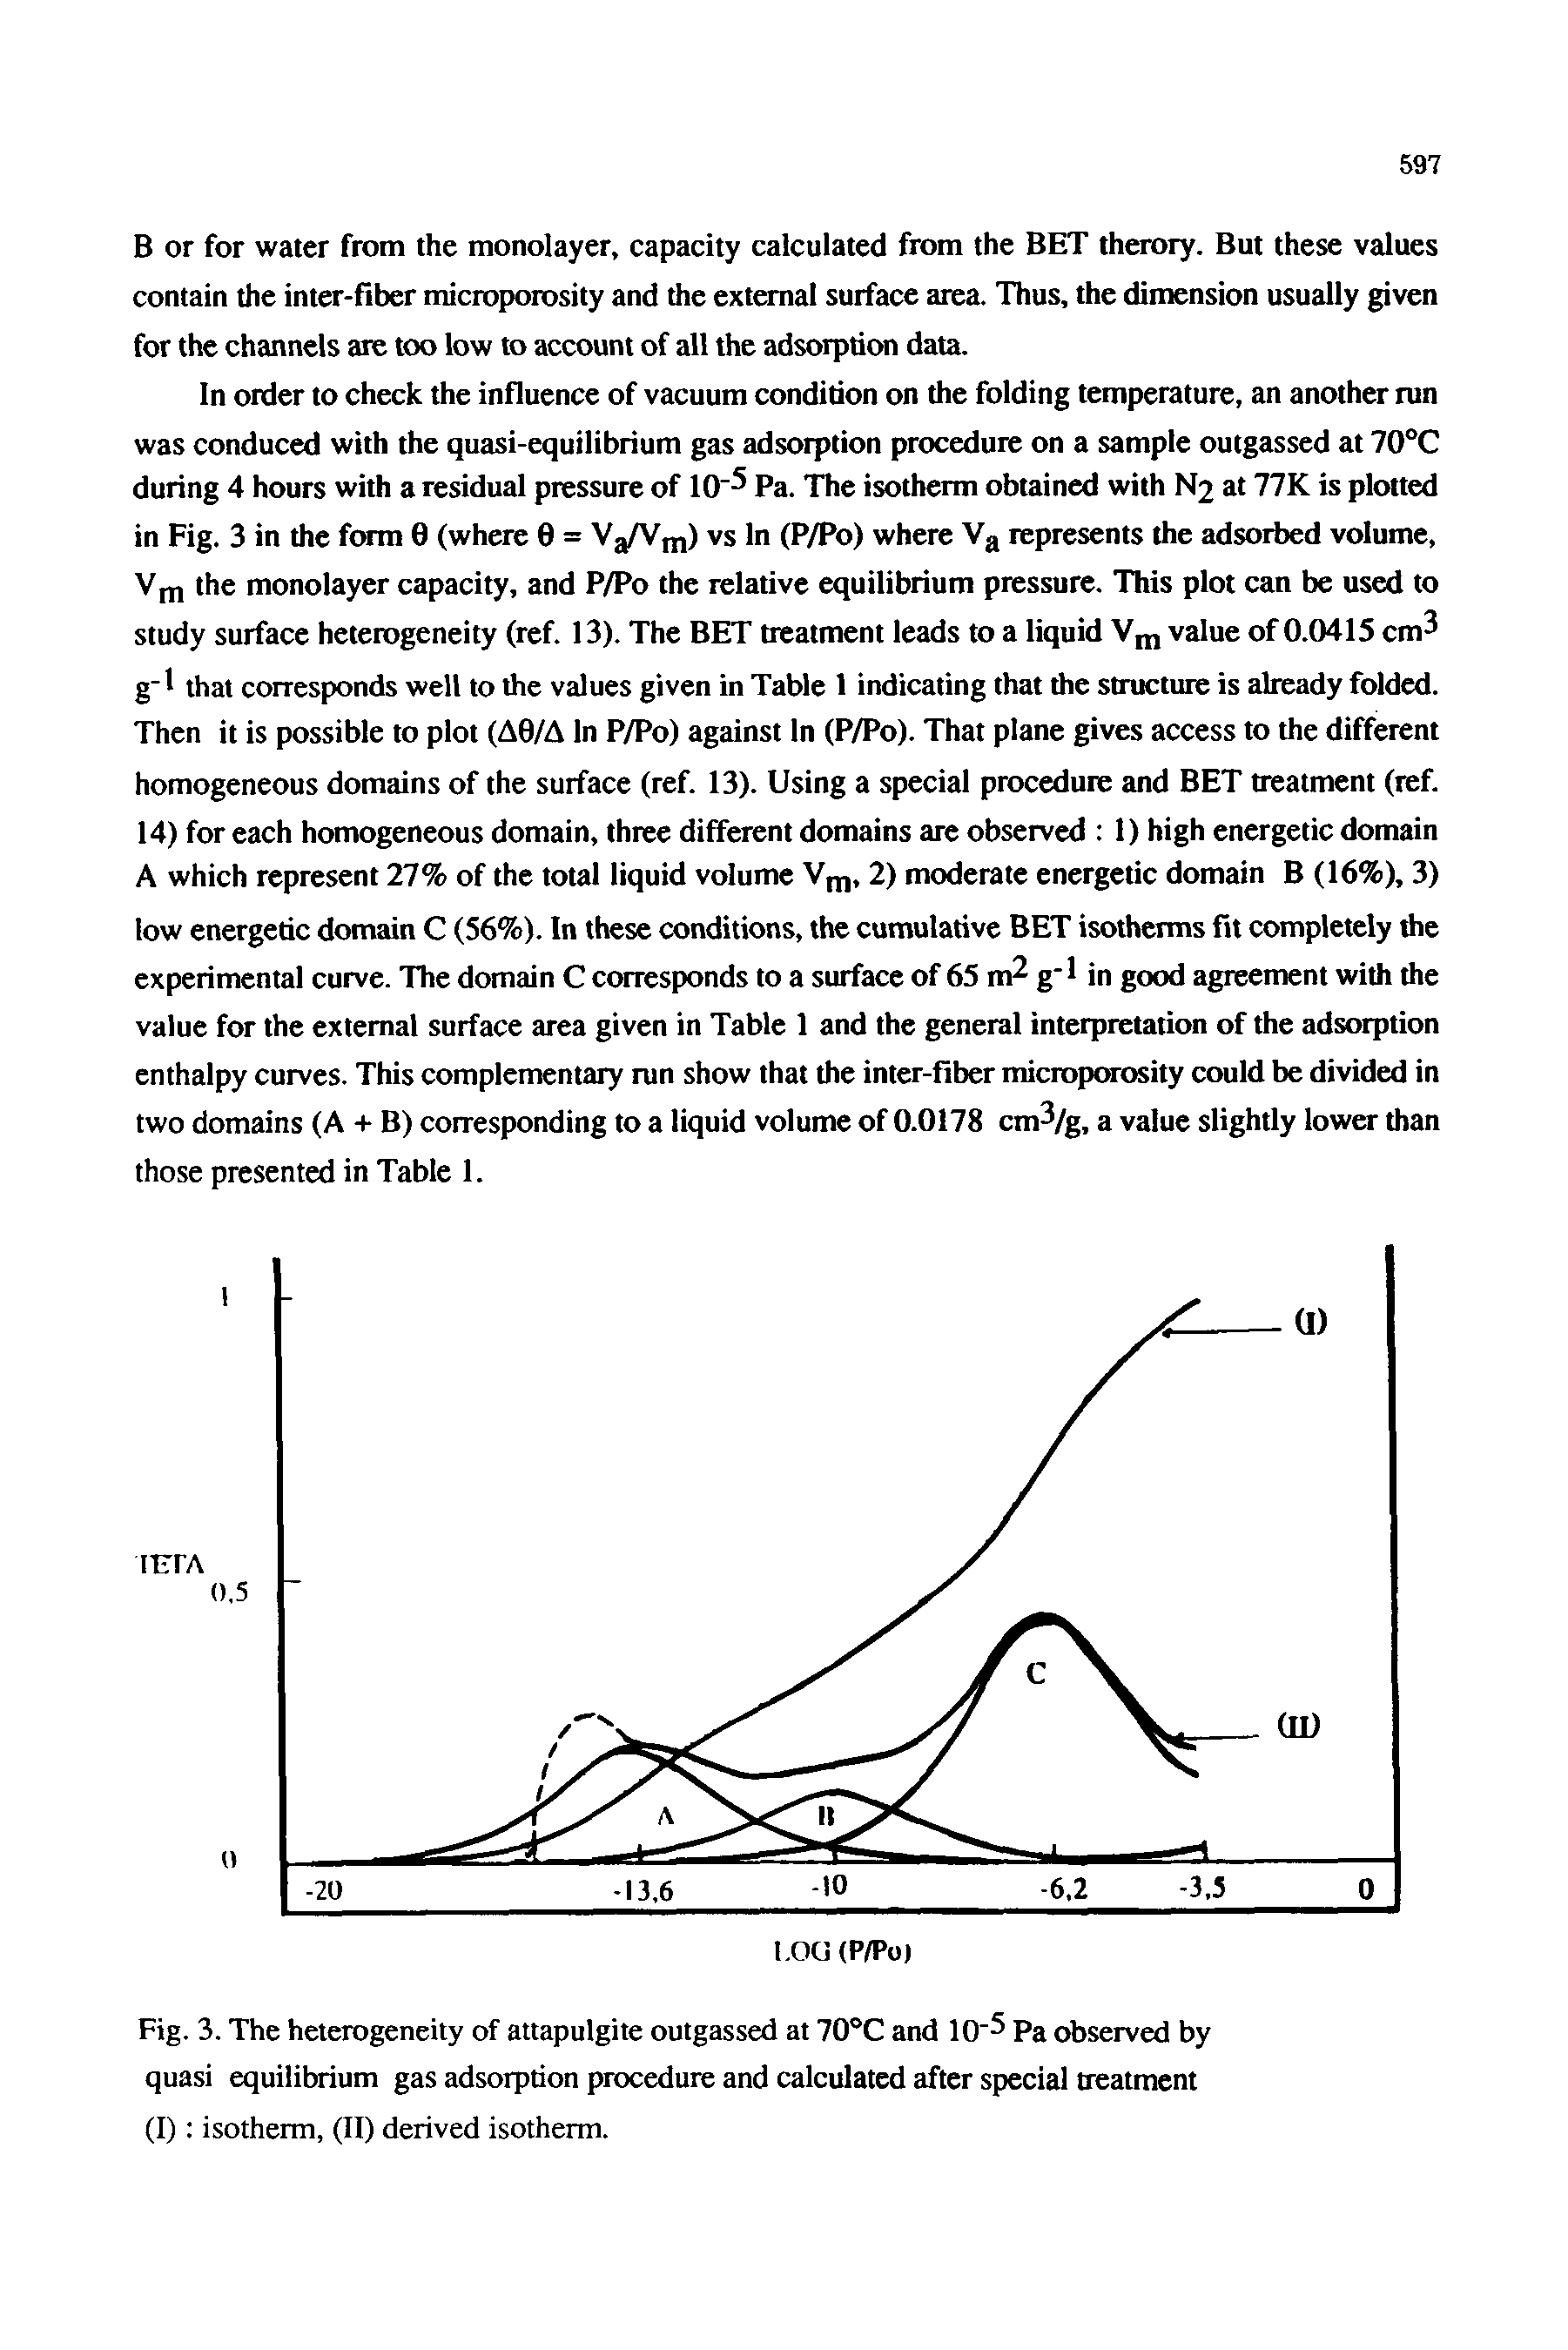 Fig. 3. The heterogeneity of attapulgite outgassed at 70°C and 10"5 Pa observed by quasi equilibrium gas adsorption procedure and calculated after special treatment...